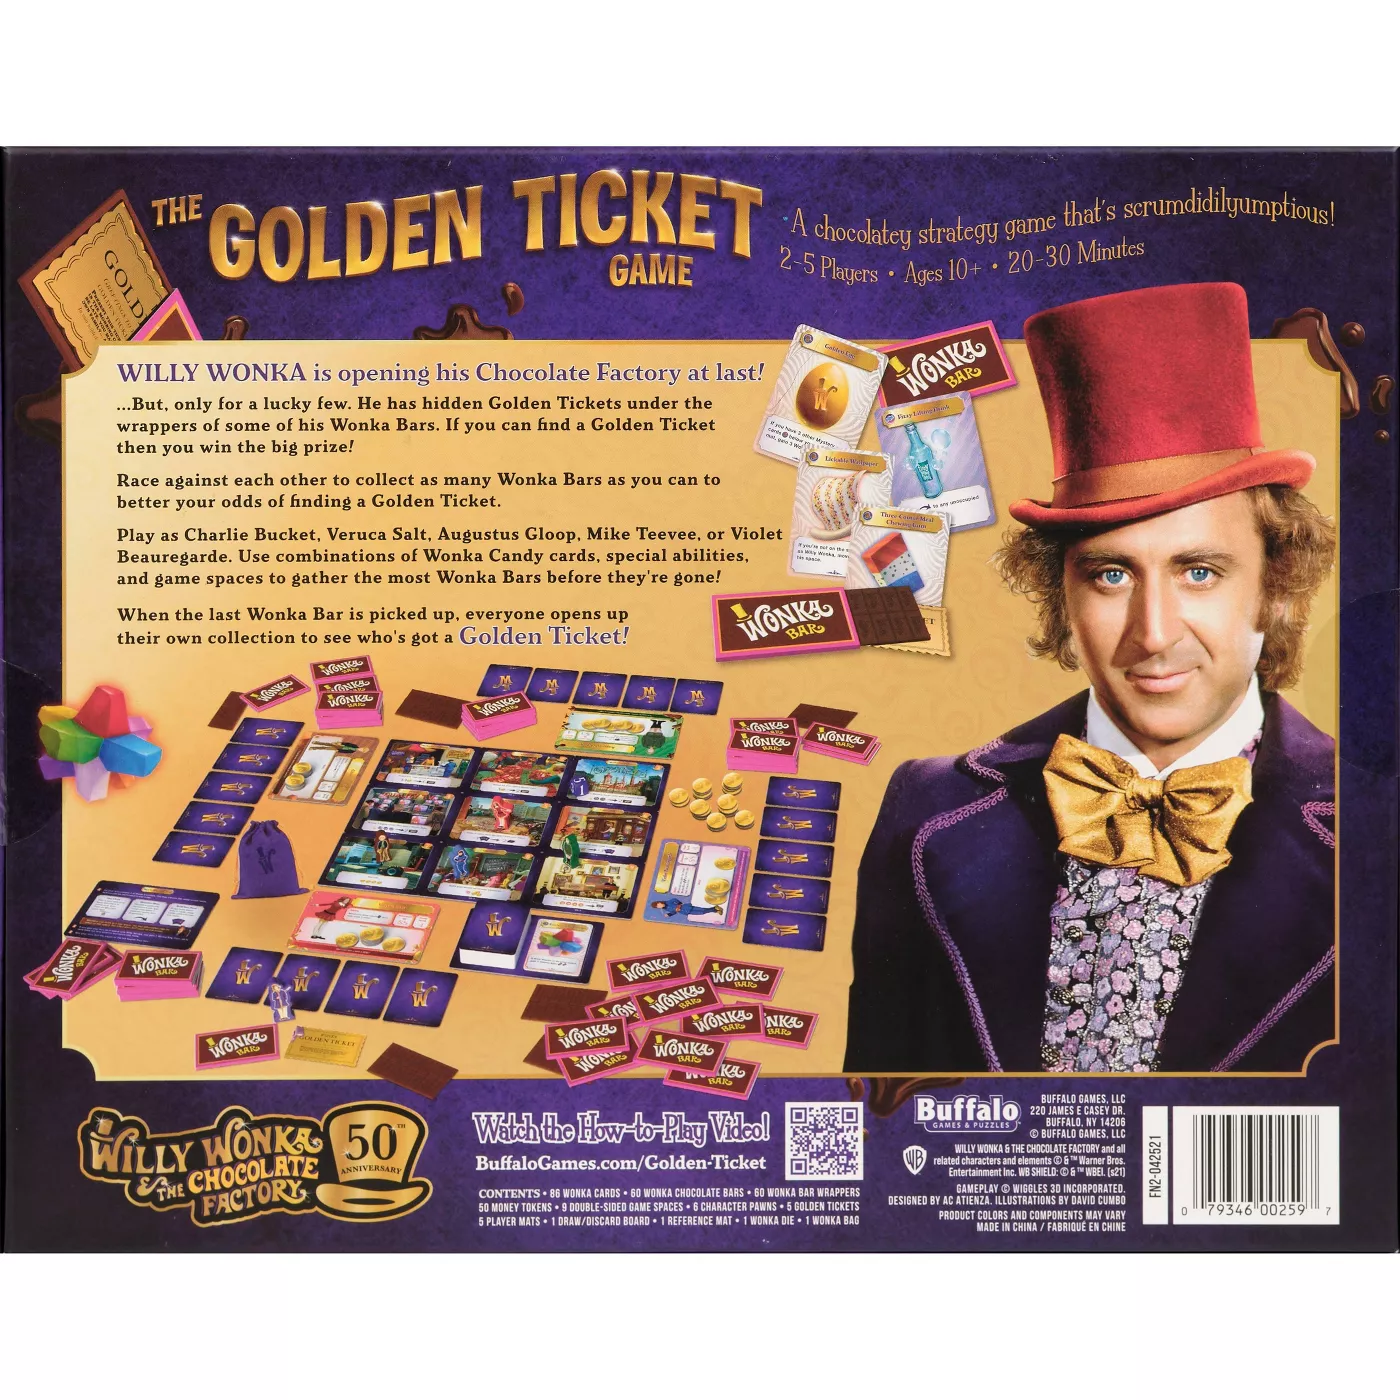 The Golden Ticket Game Willy Wonka and the Chocolate Factory Board Game - image 4 of 9